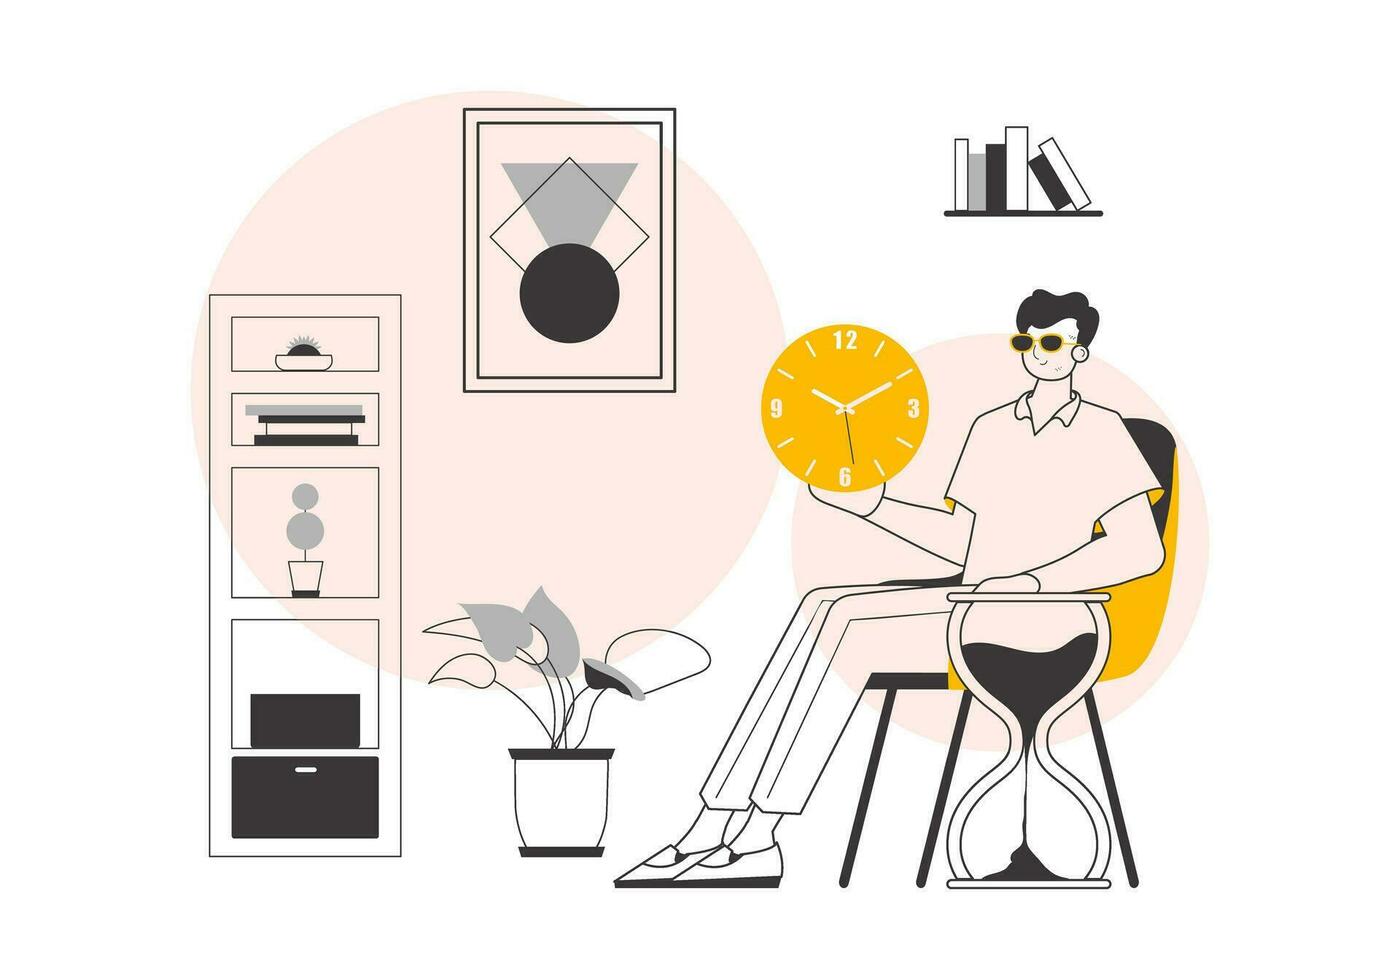 The guy is holding a watch. Time management concept. Modern linear style. Vector illustration.